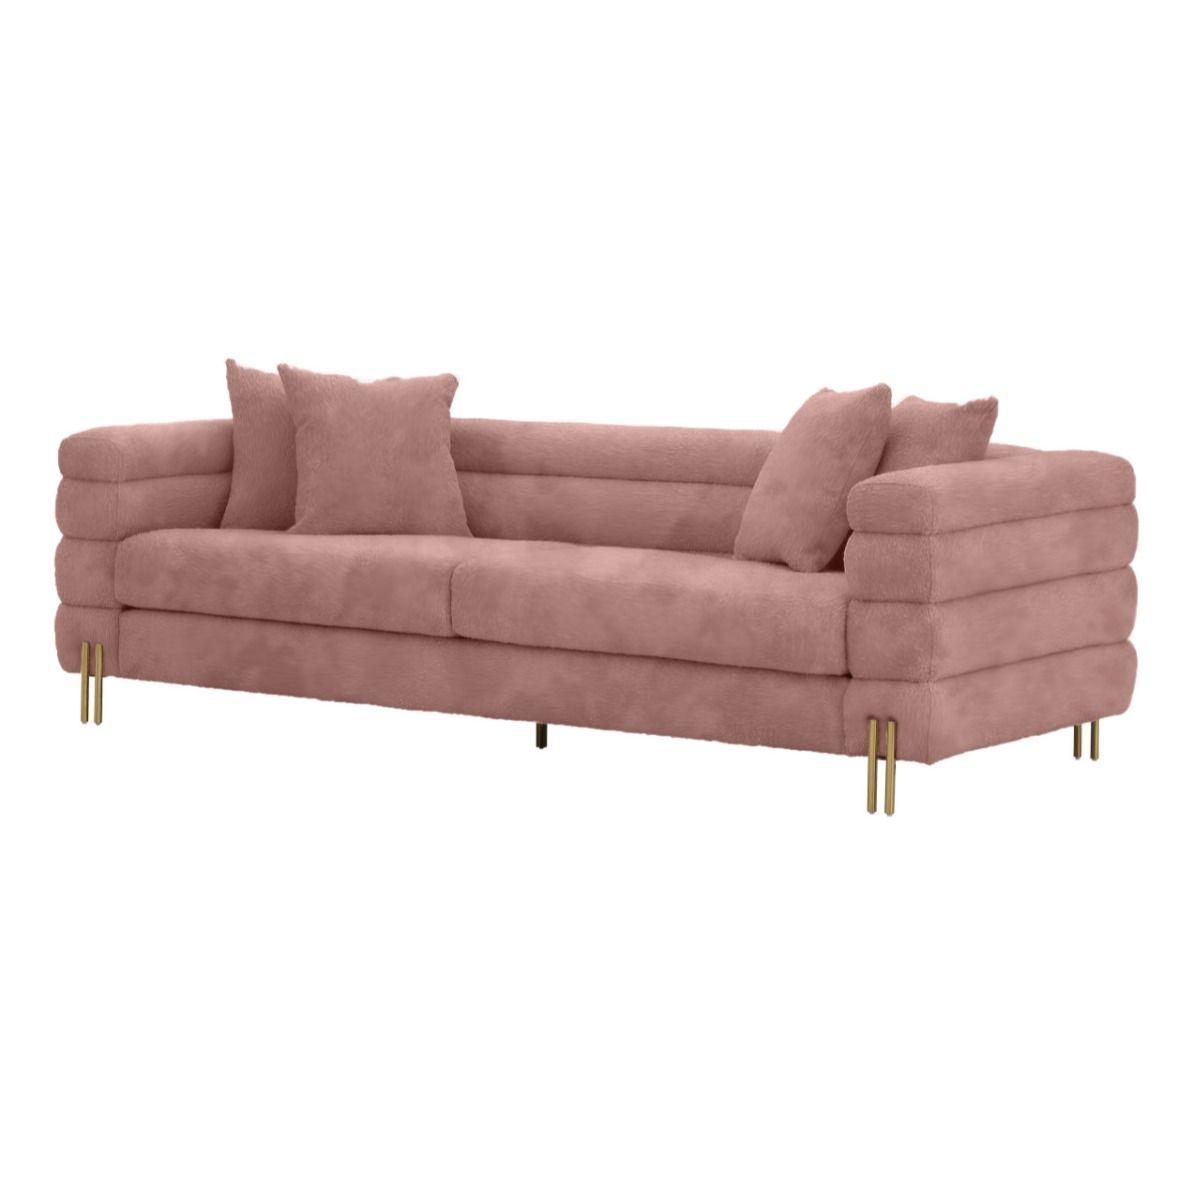 Contemporary, Modern Sofa VGMFMF-1251-3S-S VGMFMF-1251-3S-S in Pink Fabric